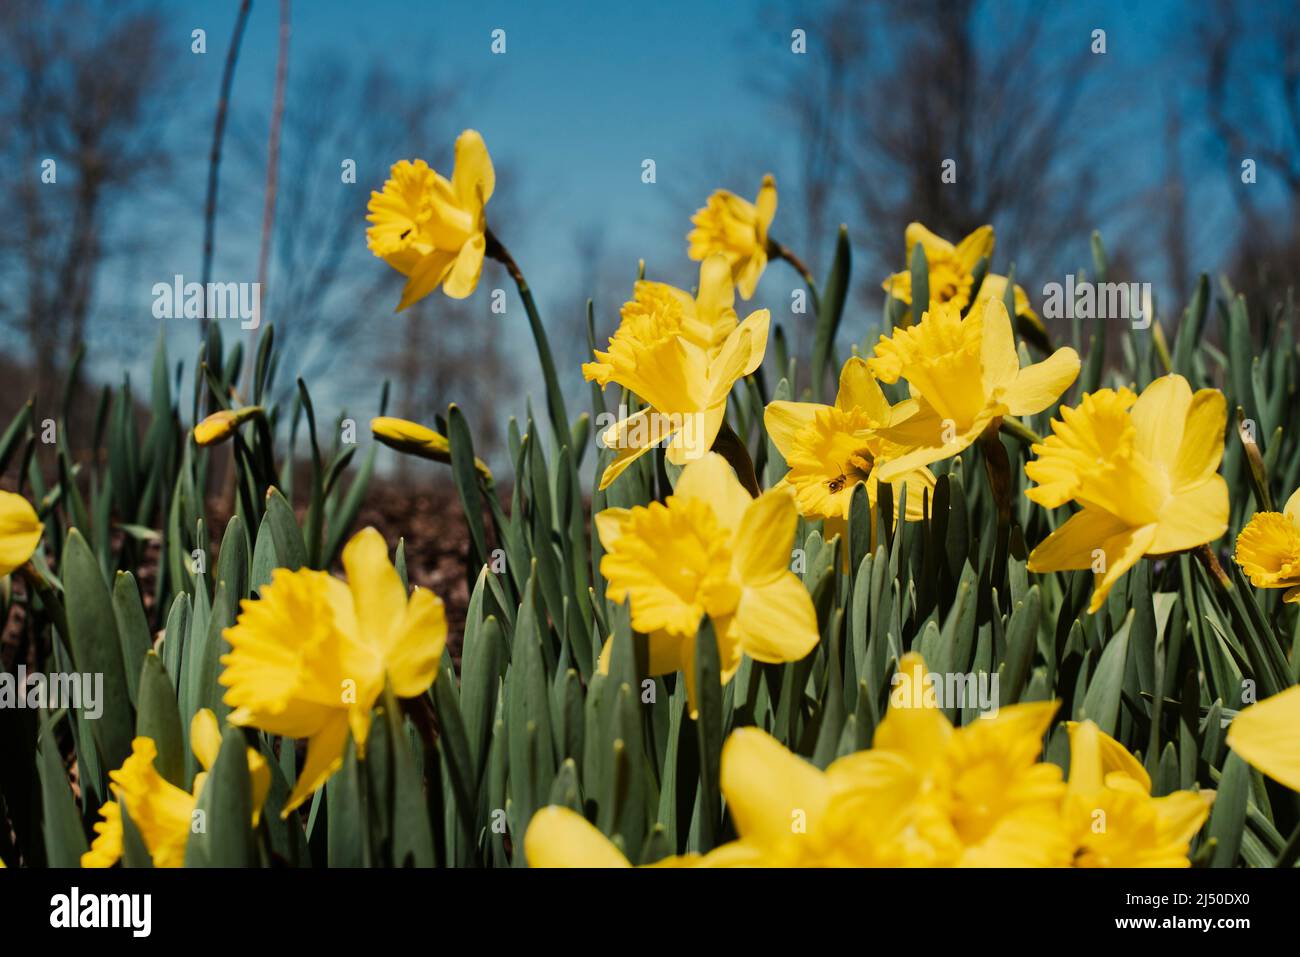 Daffodils pictured against a bright blue sky. Stock Photo